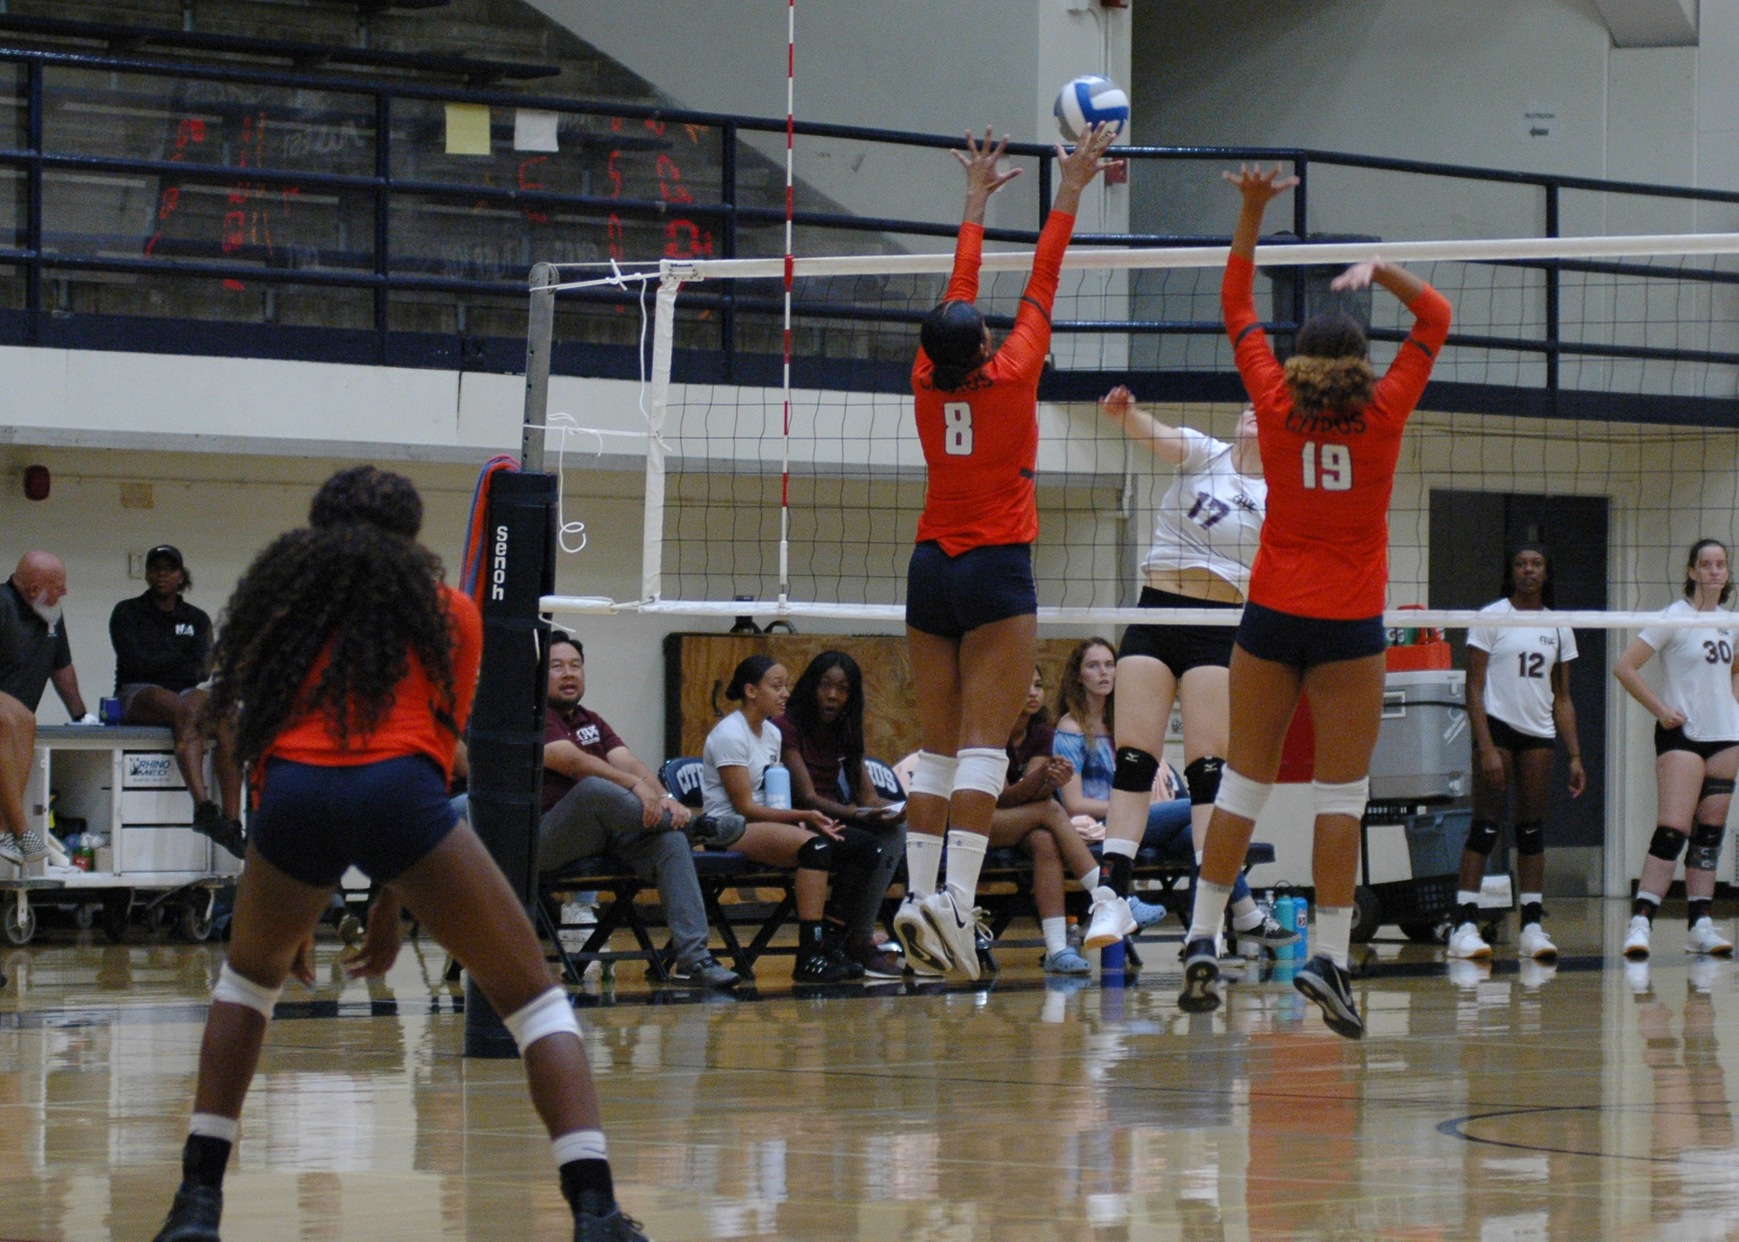 Summer Edington (8) and Danielle Rogers (19)  block against the right side attack. Image: Thomas Garcia